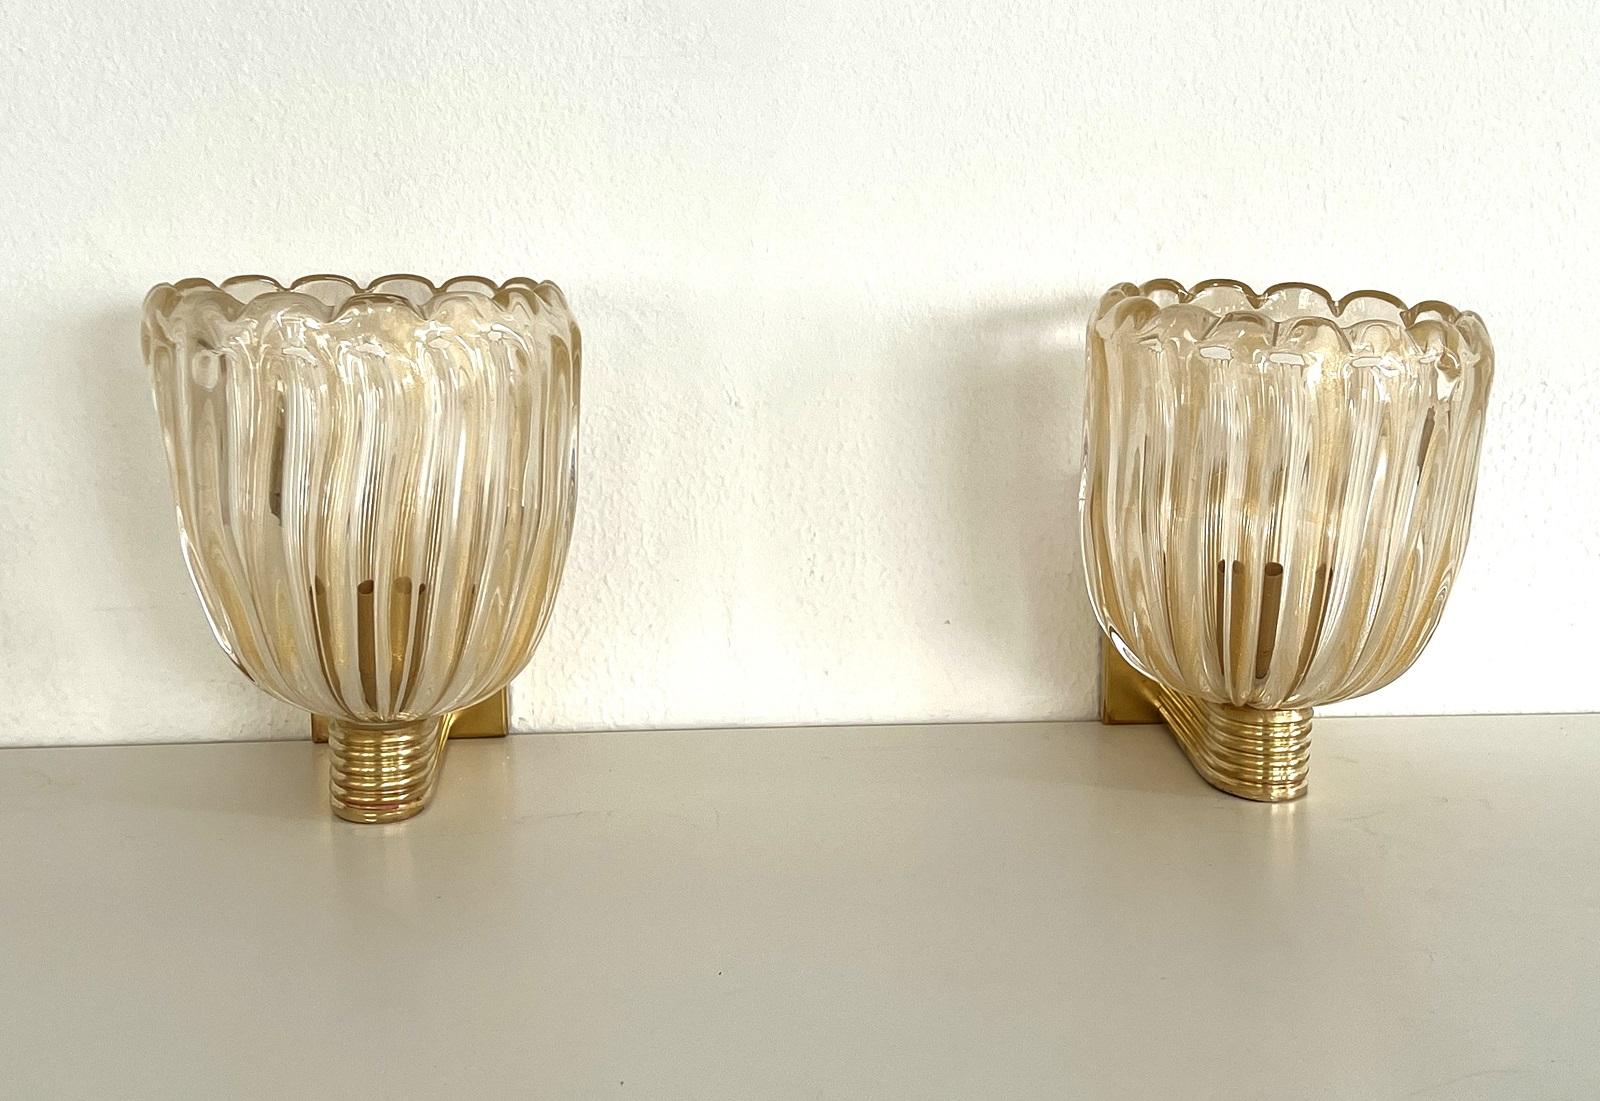 20th Century Italian Brass and Murano Glass Wall Lights or Sconces in Art Deco Style, 1990s